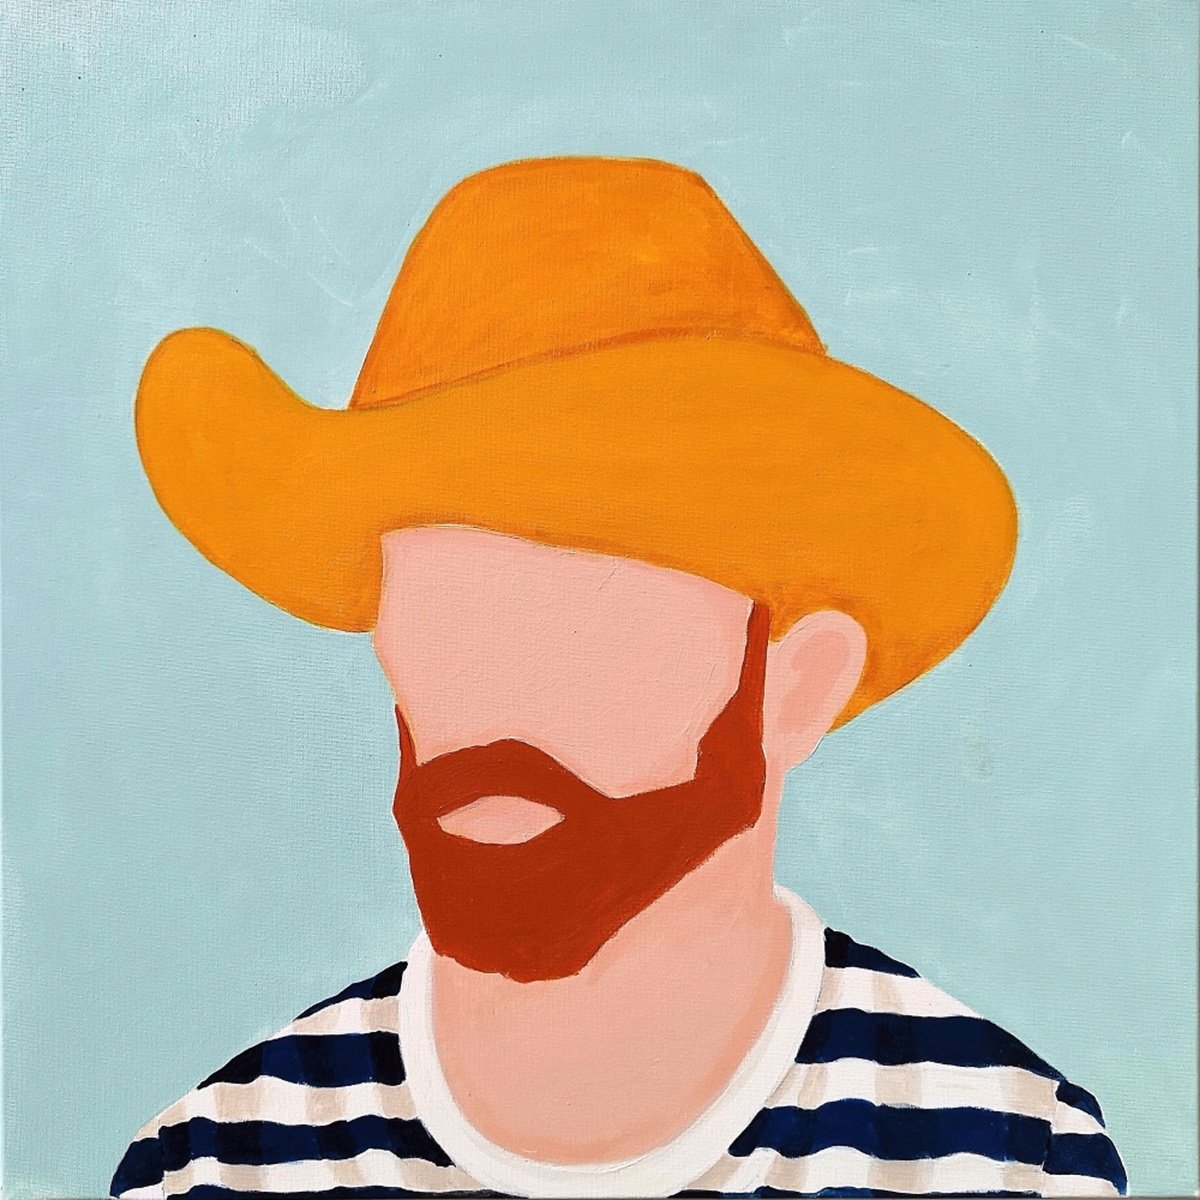 Van Gogh with Straw Hat and Blue Stripes by Marisa Anon